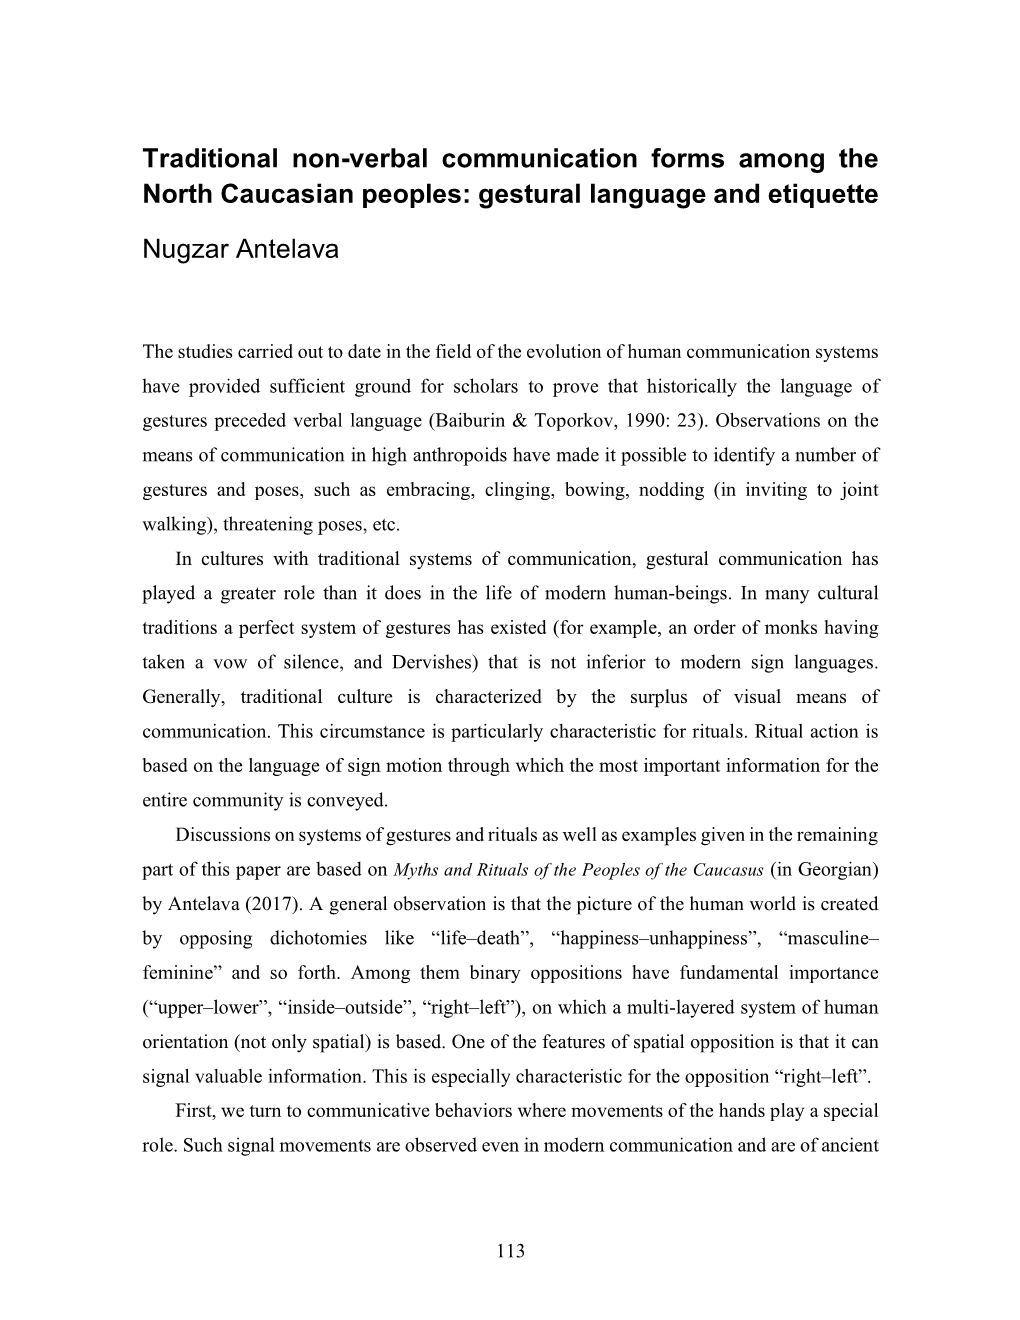 Traditional Non-Verbal Communication Forms Among the North Caucasian Peoples: Gestural Language and Etiquette